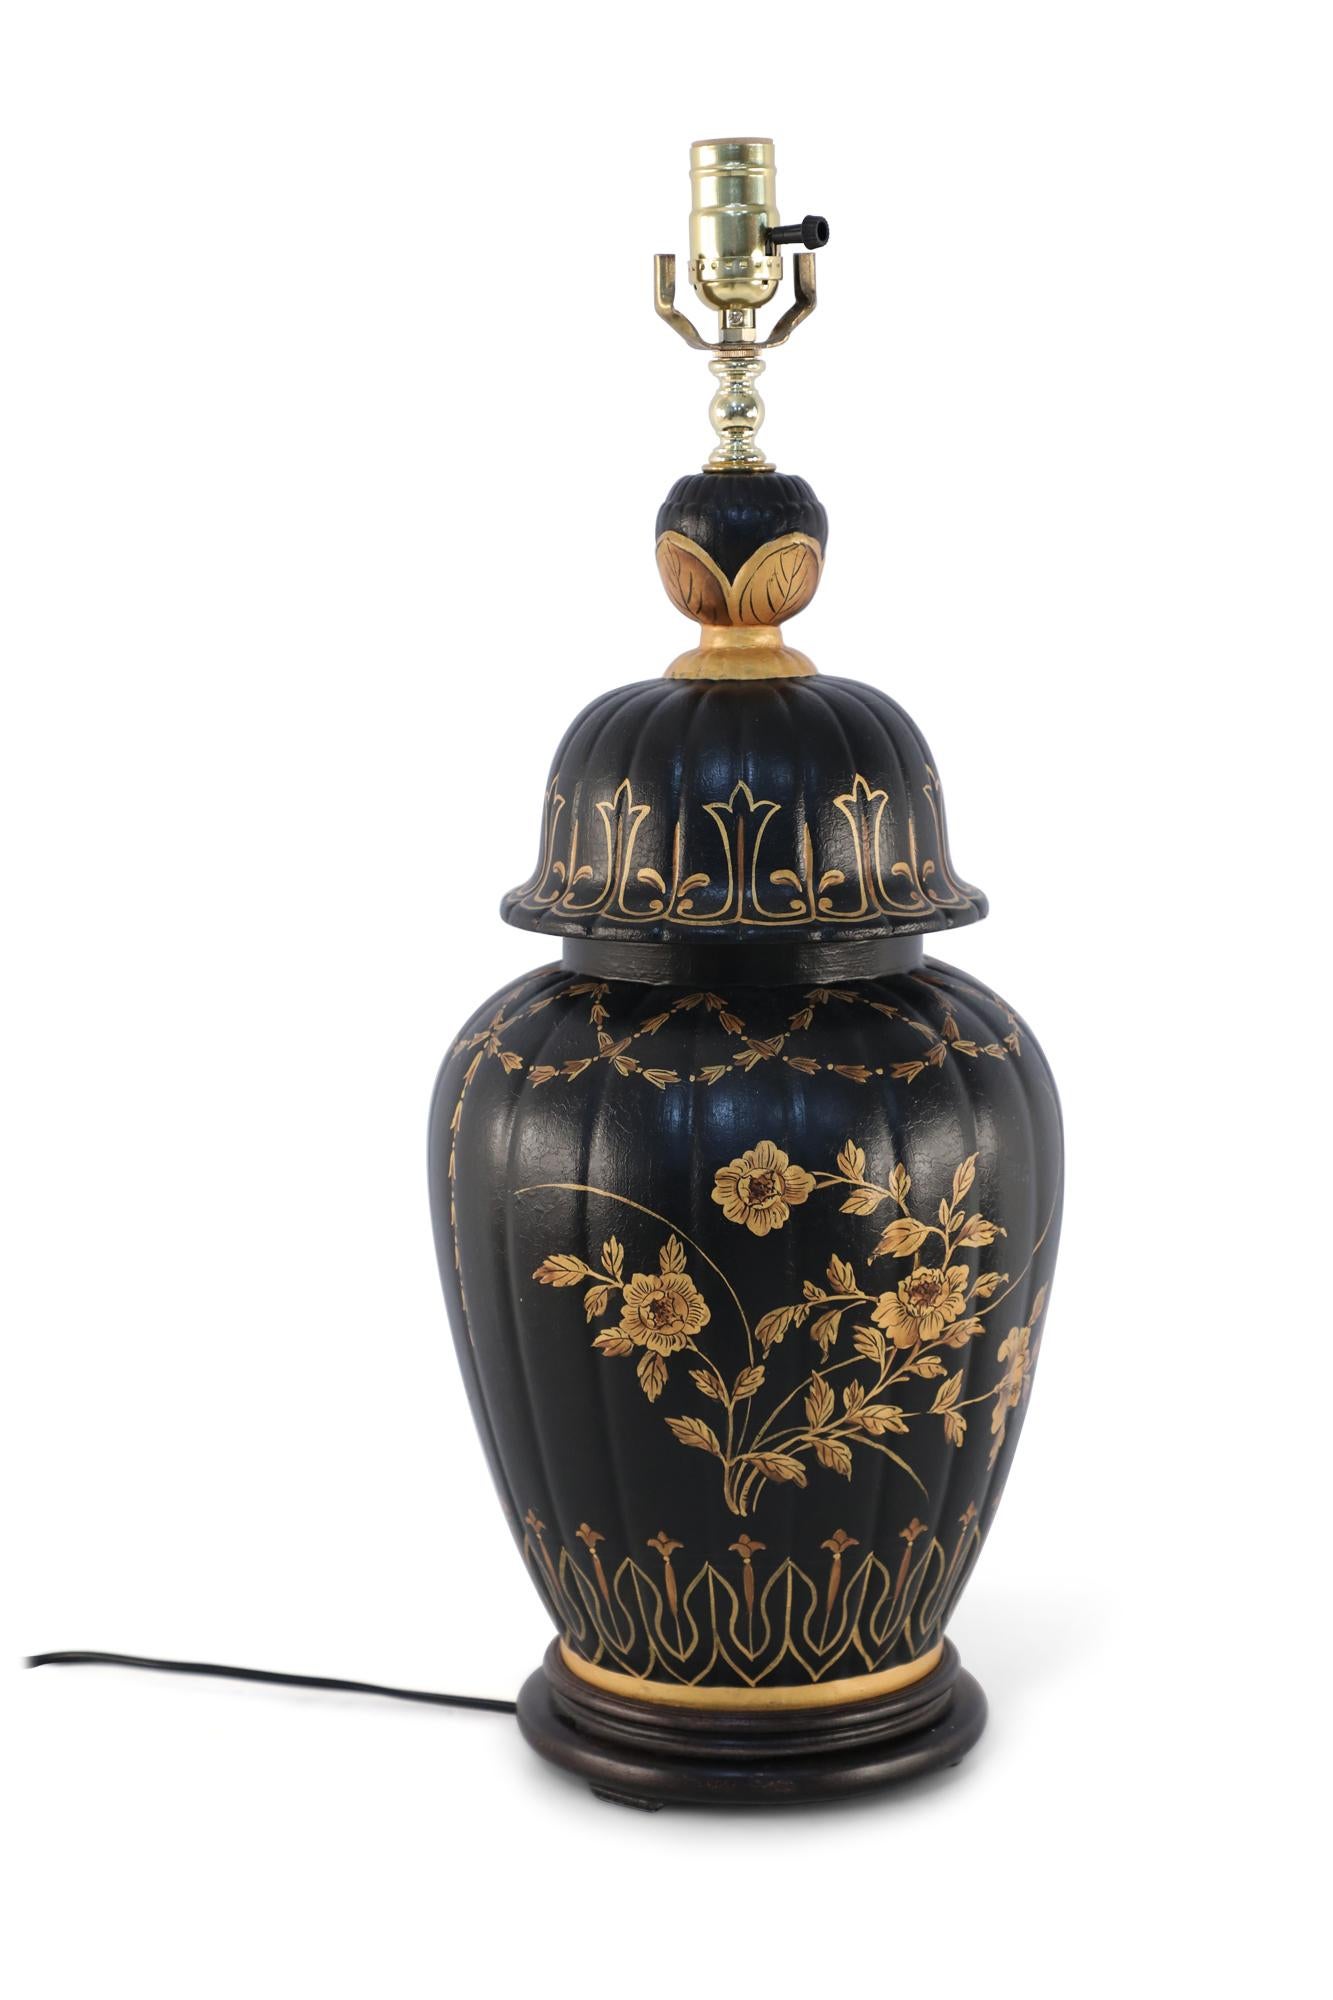 Chinese Regency Style Black and Gold Floral Lidded Urn Porcelain Table Lamp For Sale 2